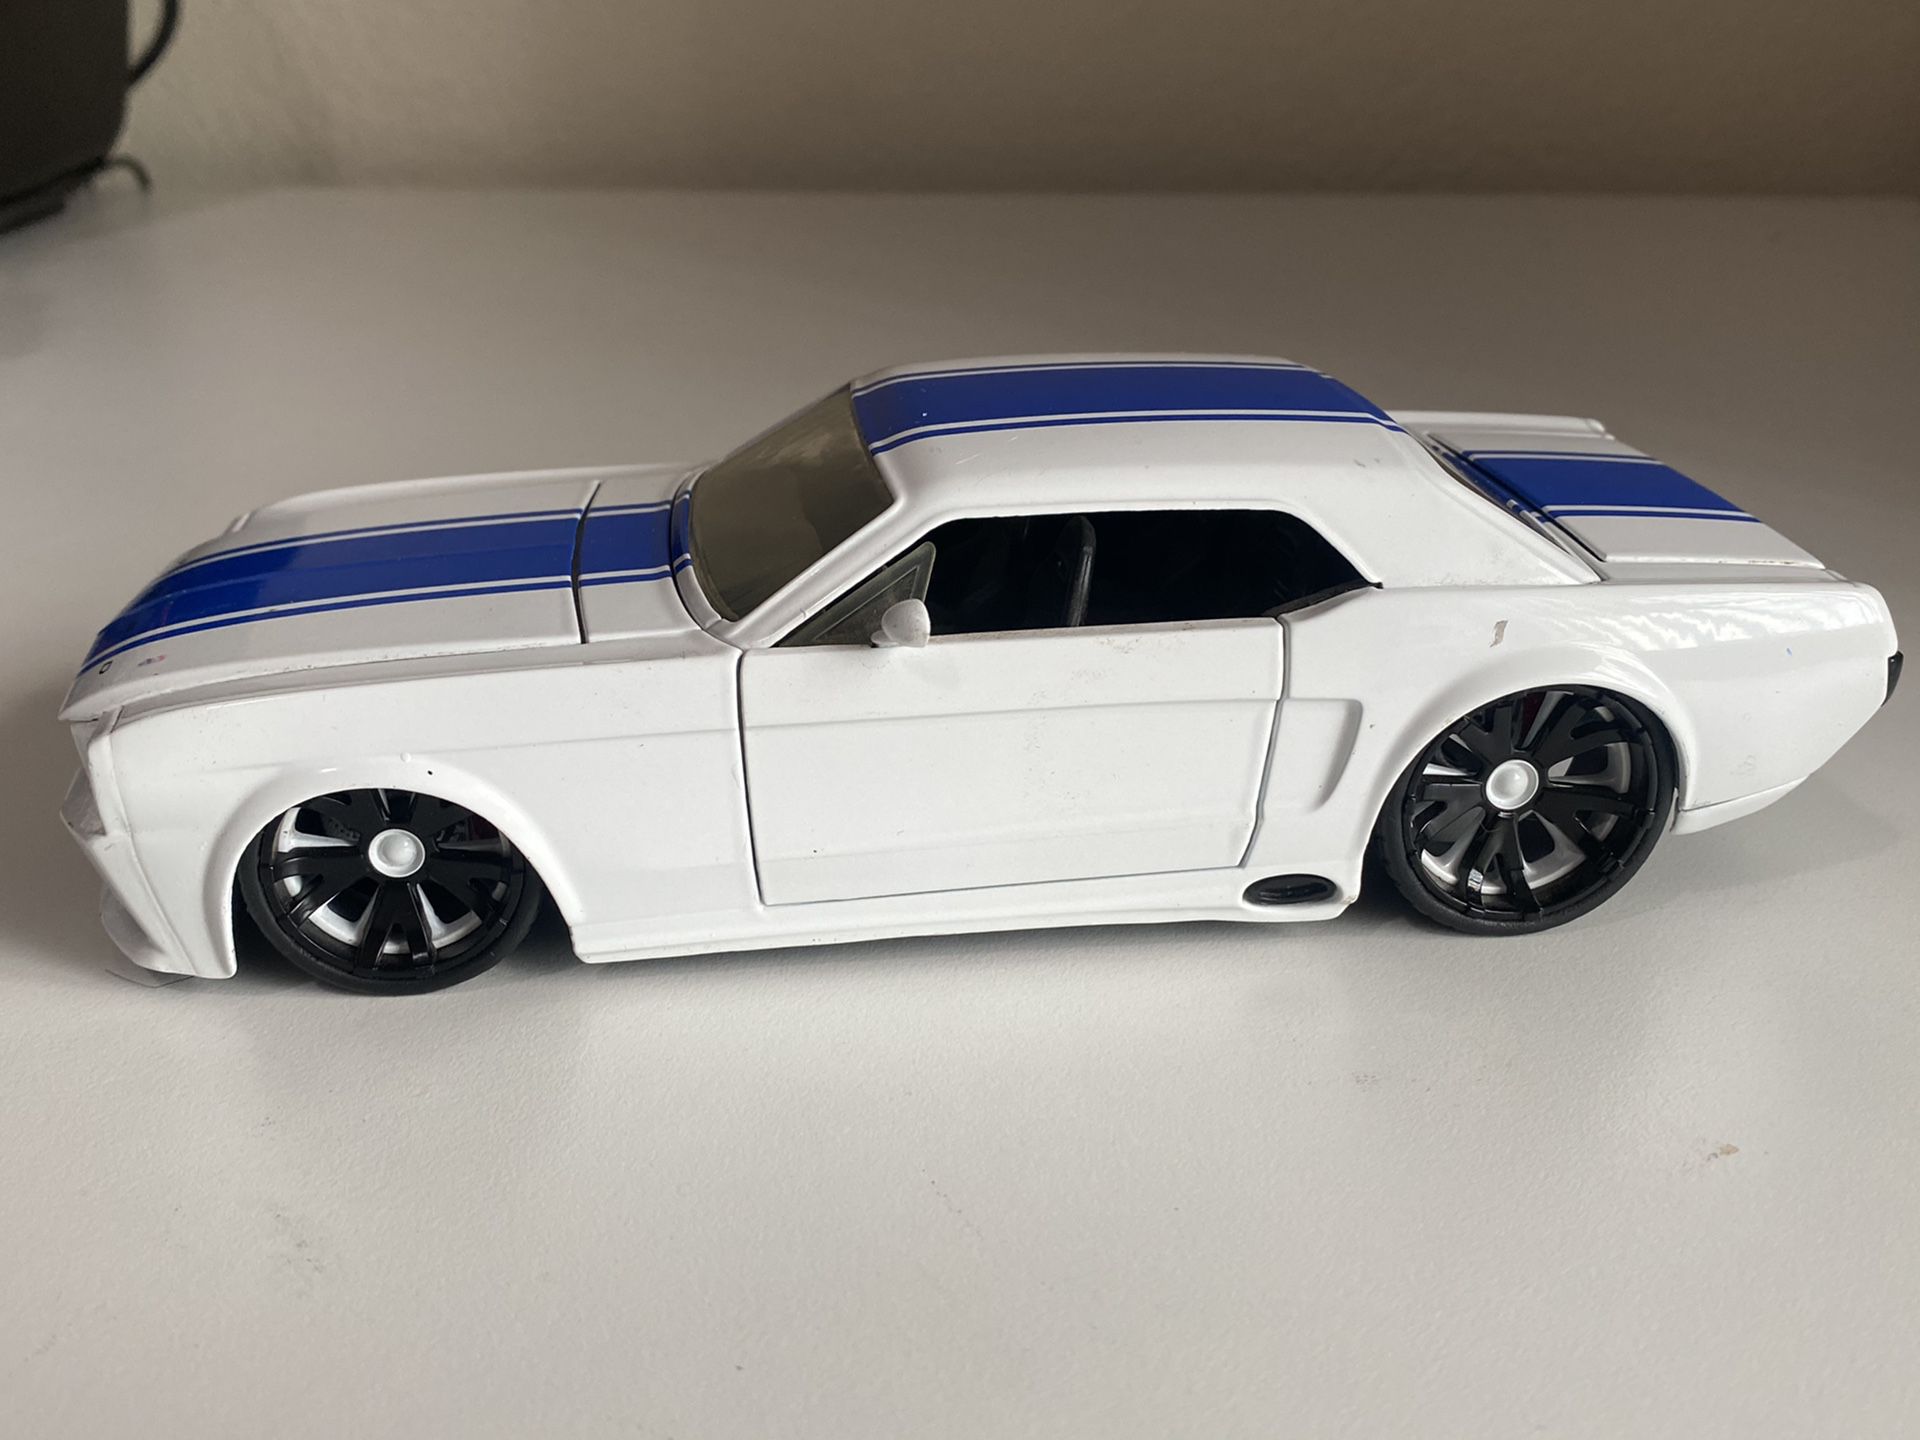 65 Ford Mustang diecast model 1:24